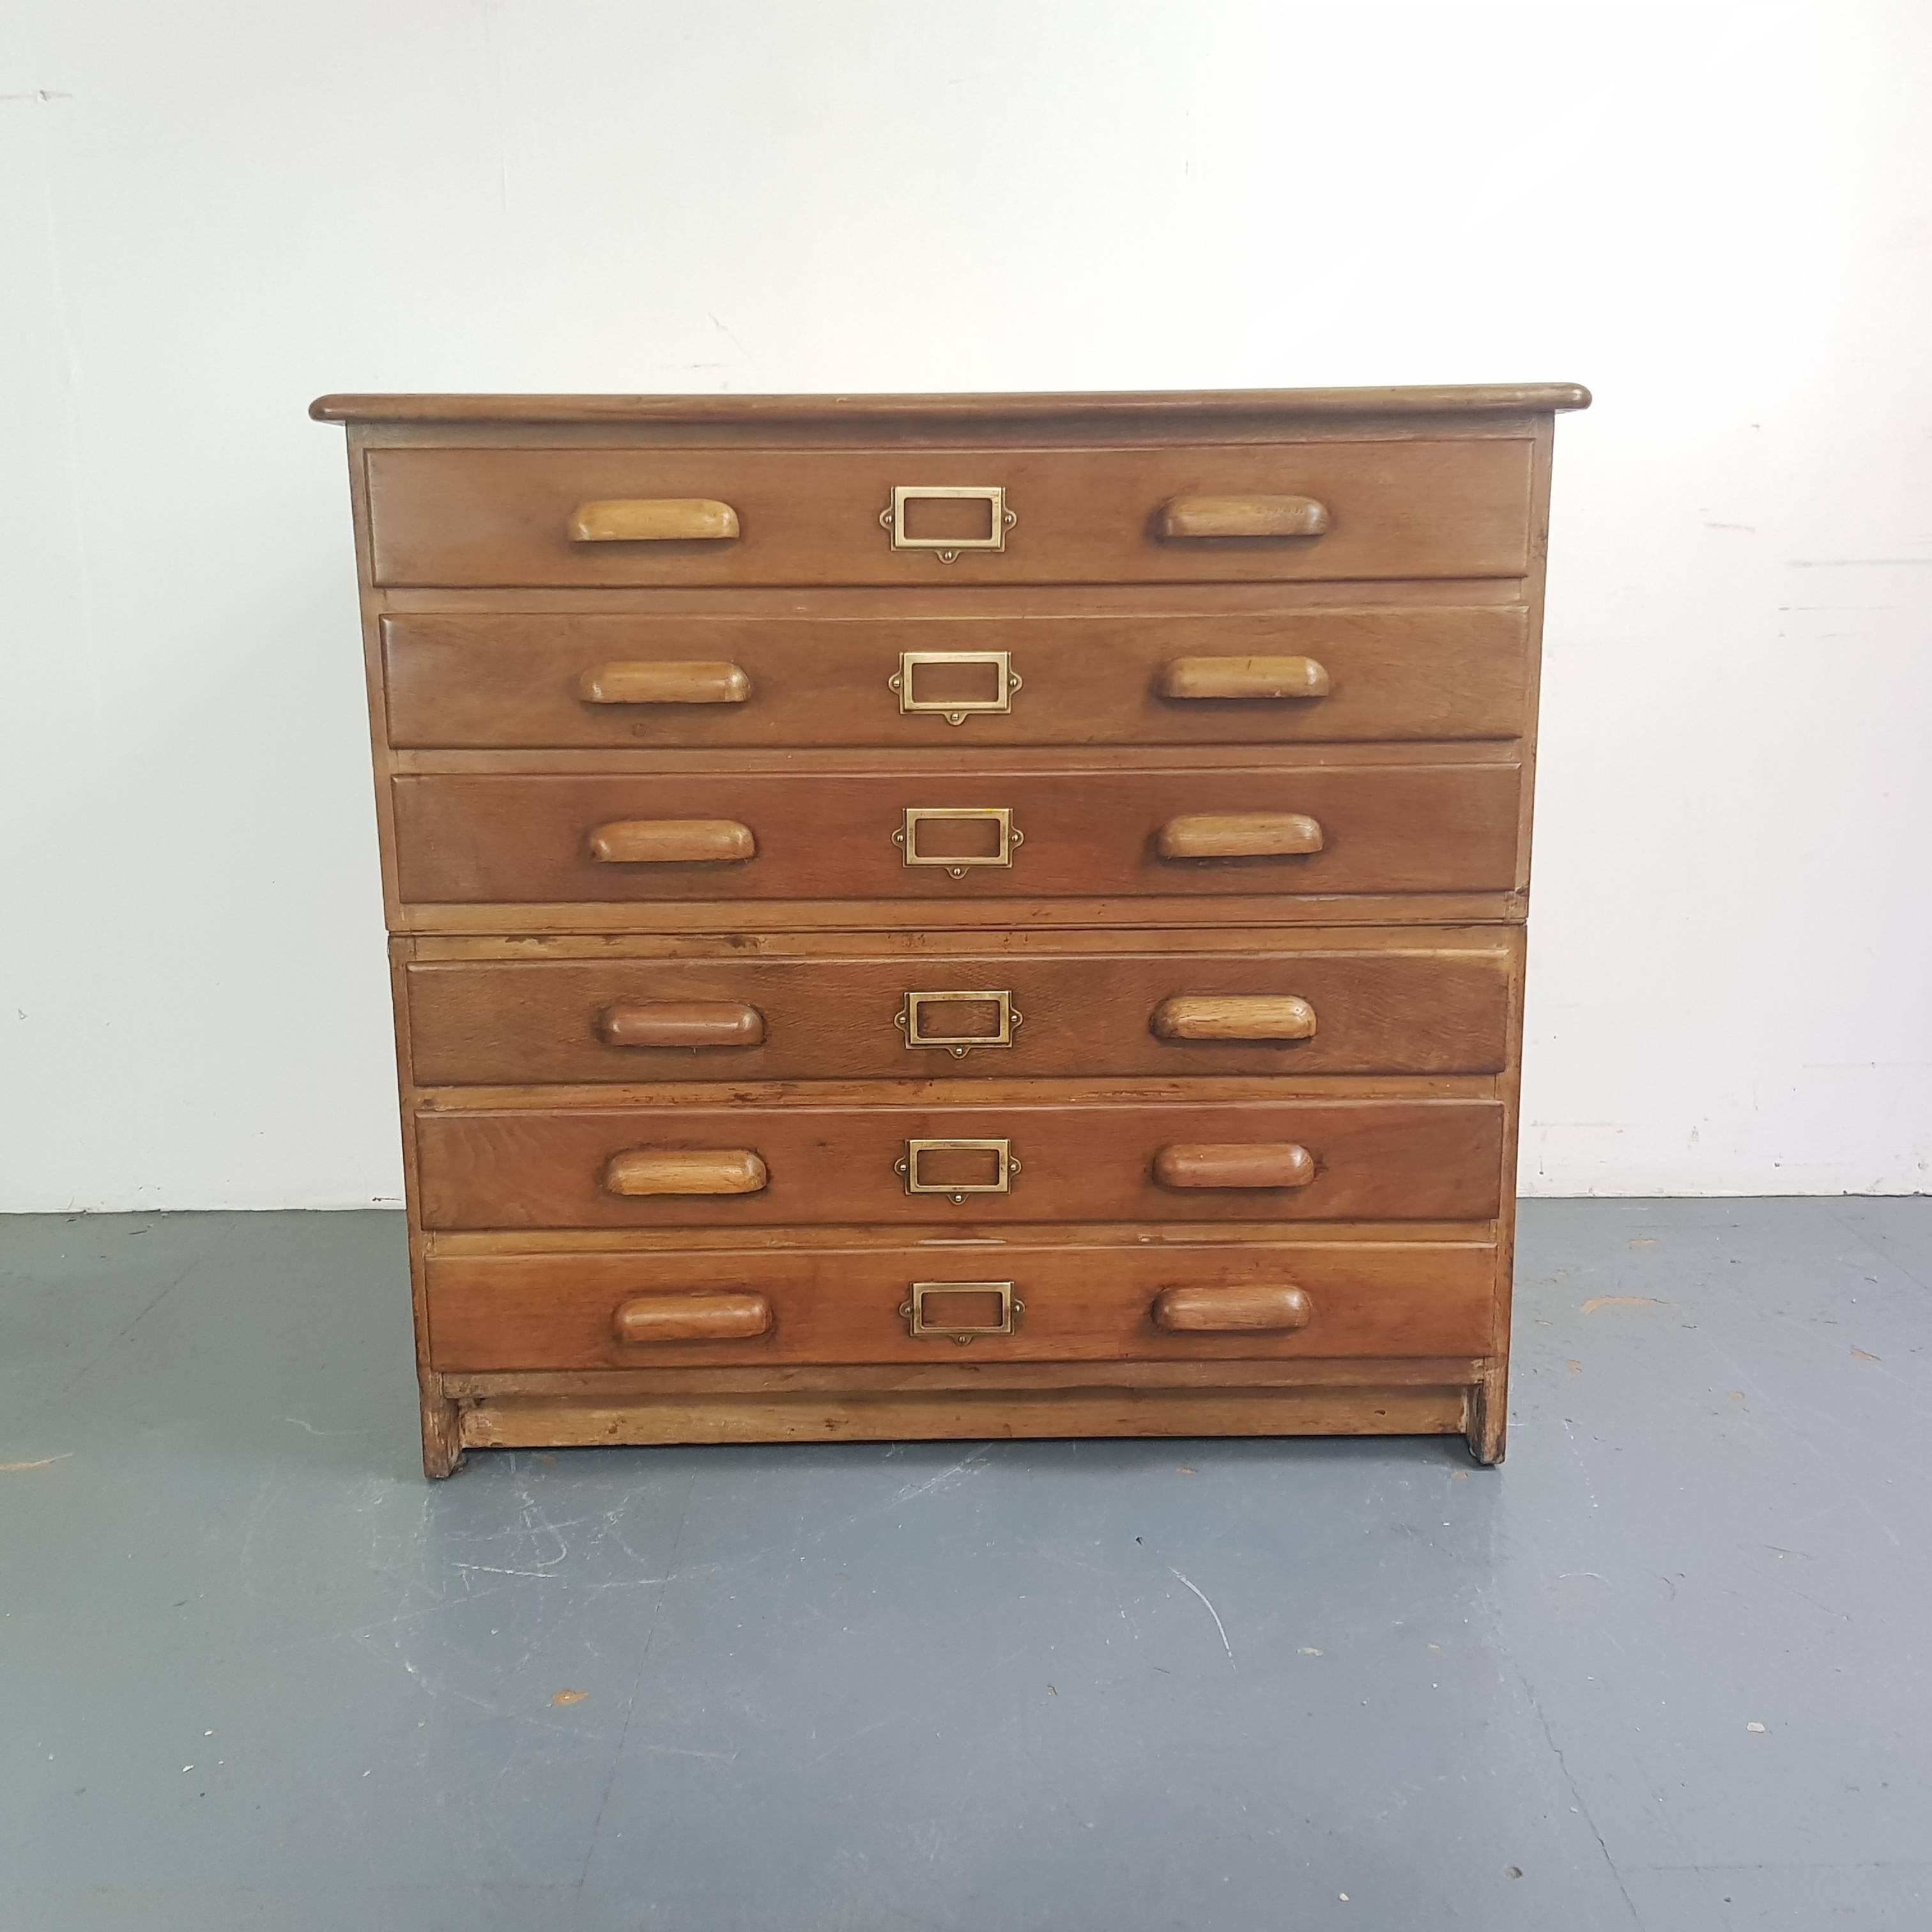 Lovely oak six-drawer midcentury plan chest with wooden handles and brass label inserts.

The plan chest has six solid wooden drawers and panelled sides.

Approximate dimensions: 

Height 87 cm

Width 94 cm

Depth 71 cm

Drawers: 82 cm W